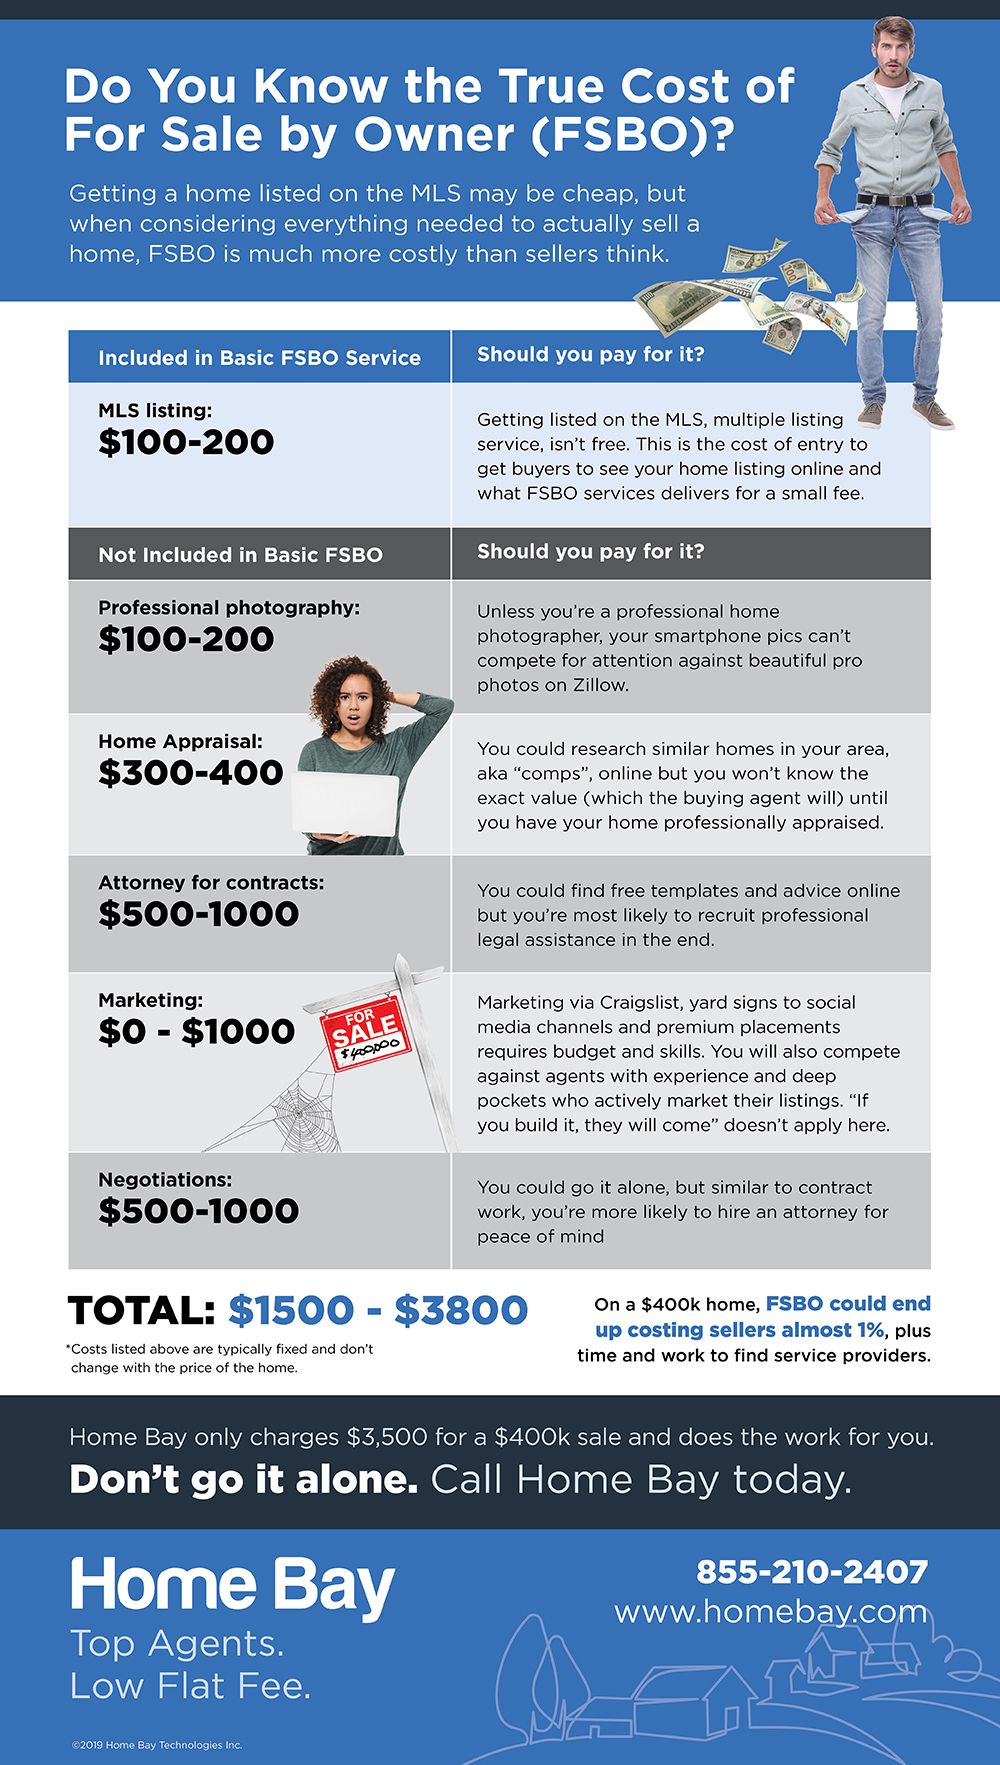 Infographic: Do You Know The True Cost of For Sale by Owner (FSBO)?